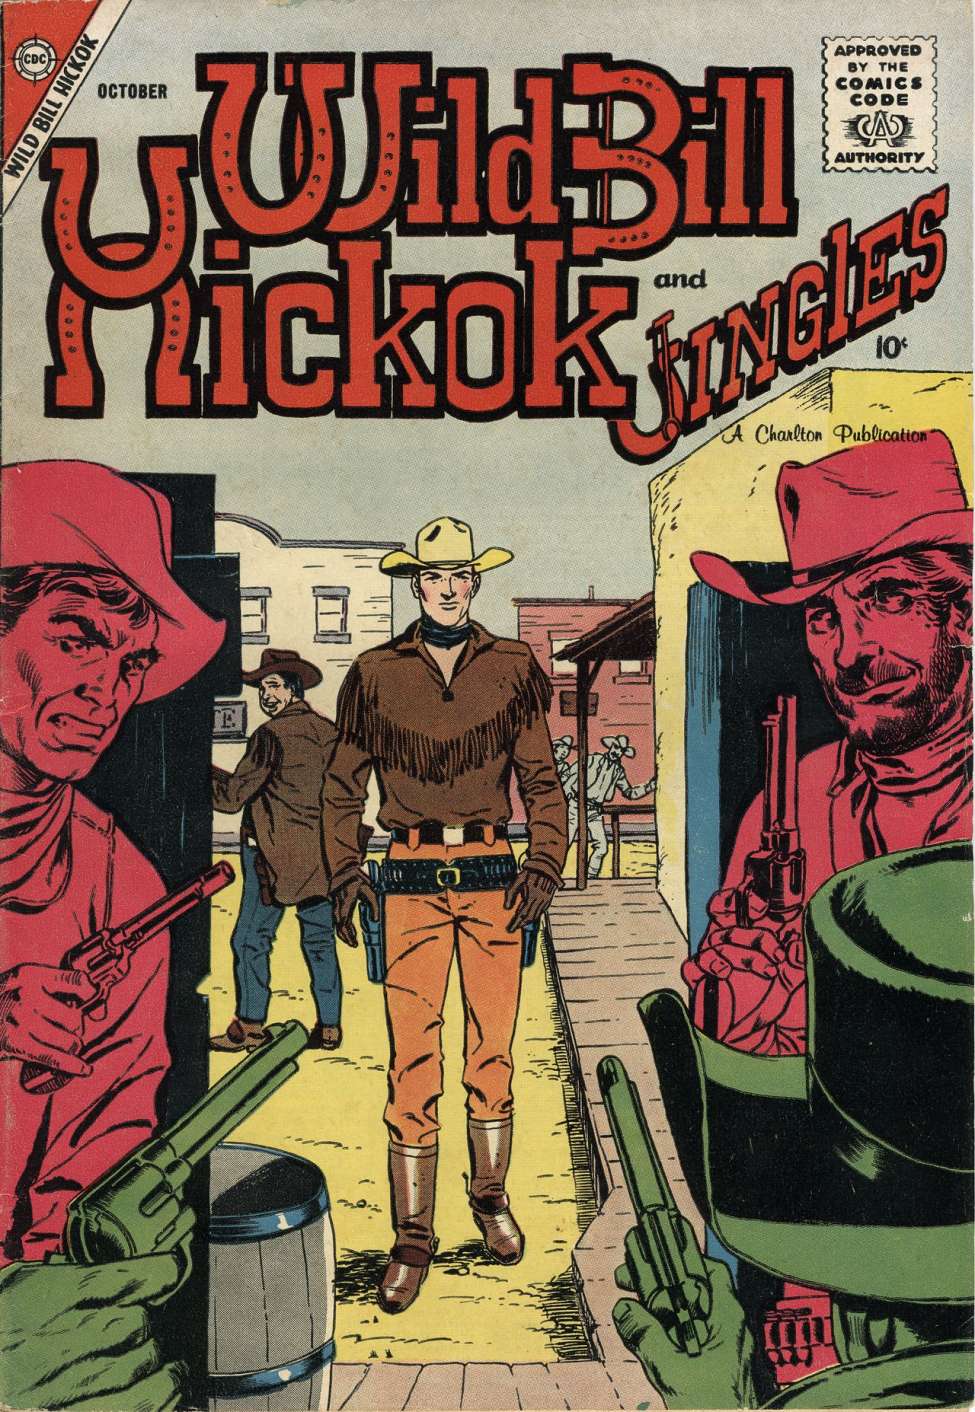 Book Cover For Wild Bill Hickok and Jingles 69